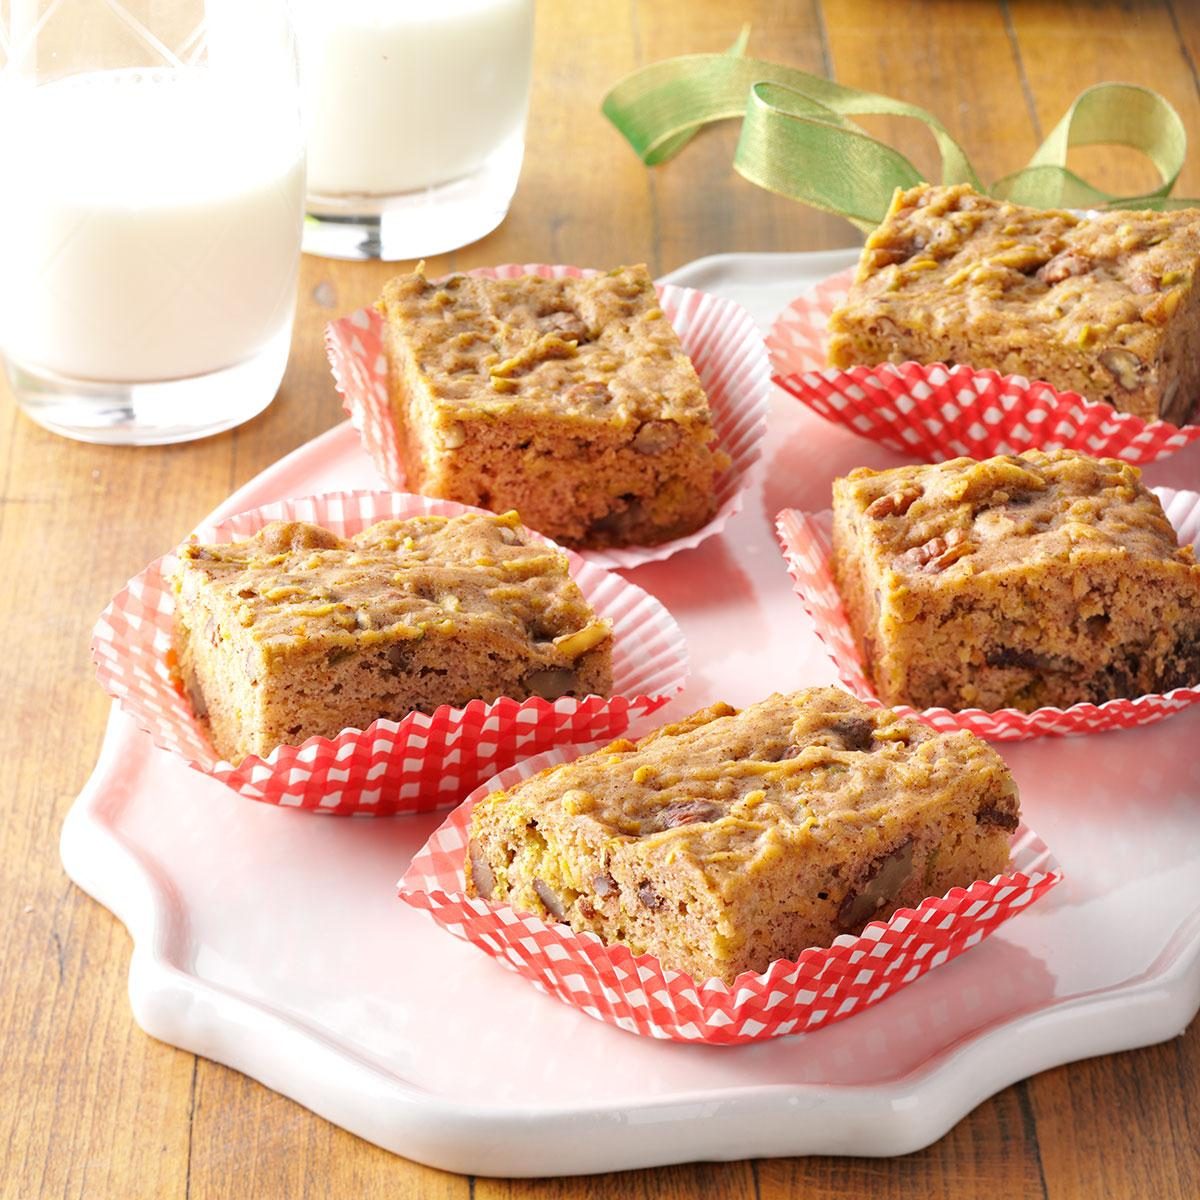 Inspired by Apples to Apples: Chunky Apple Snack Cake